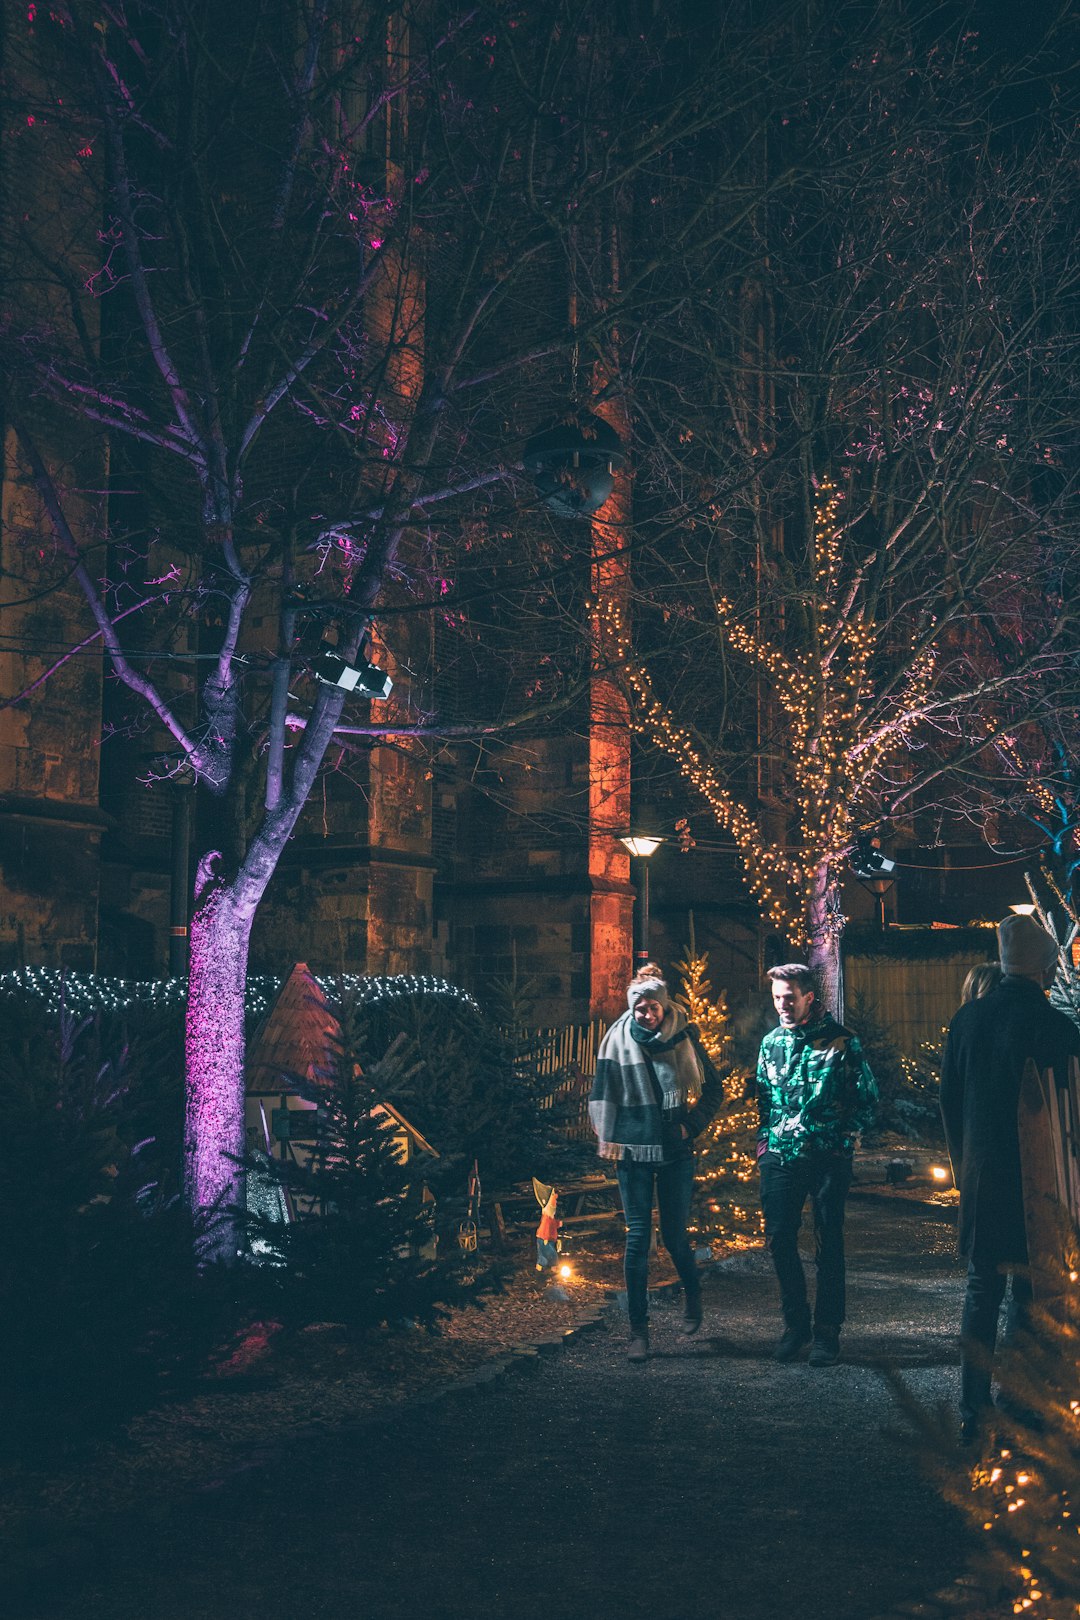 man and woman waking by trees with string lights at nighttime